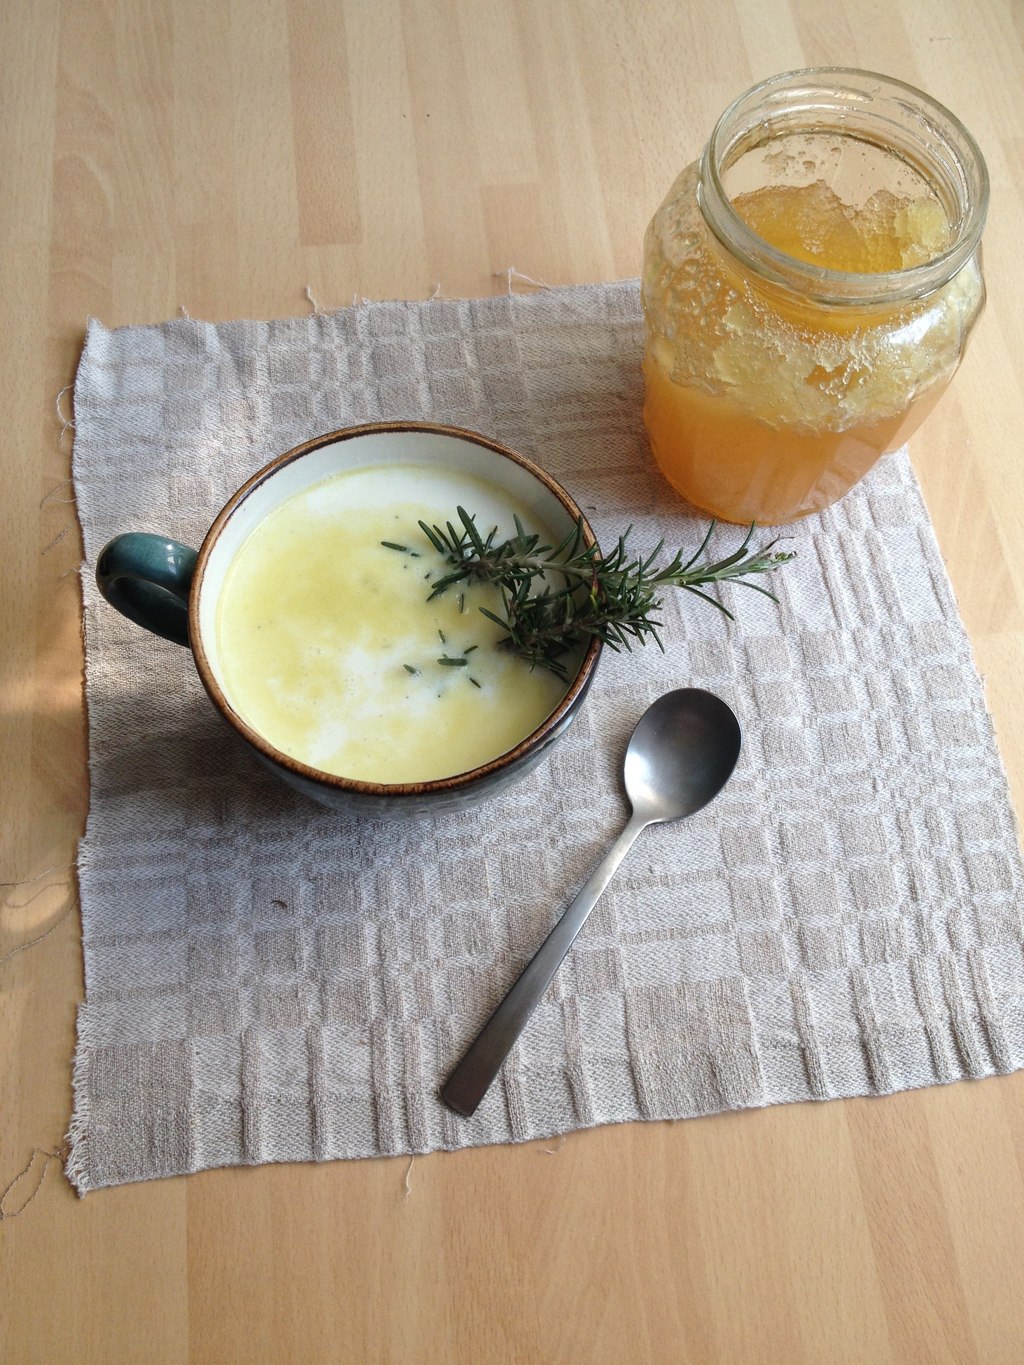 Rosemary milk for colds recipie